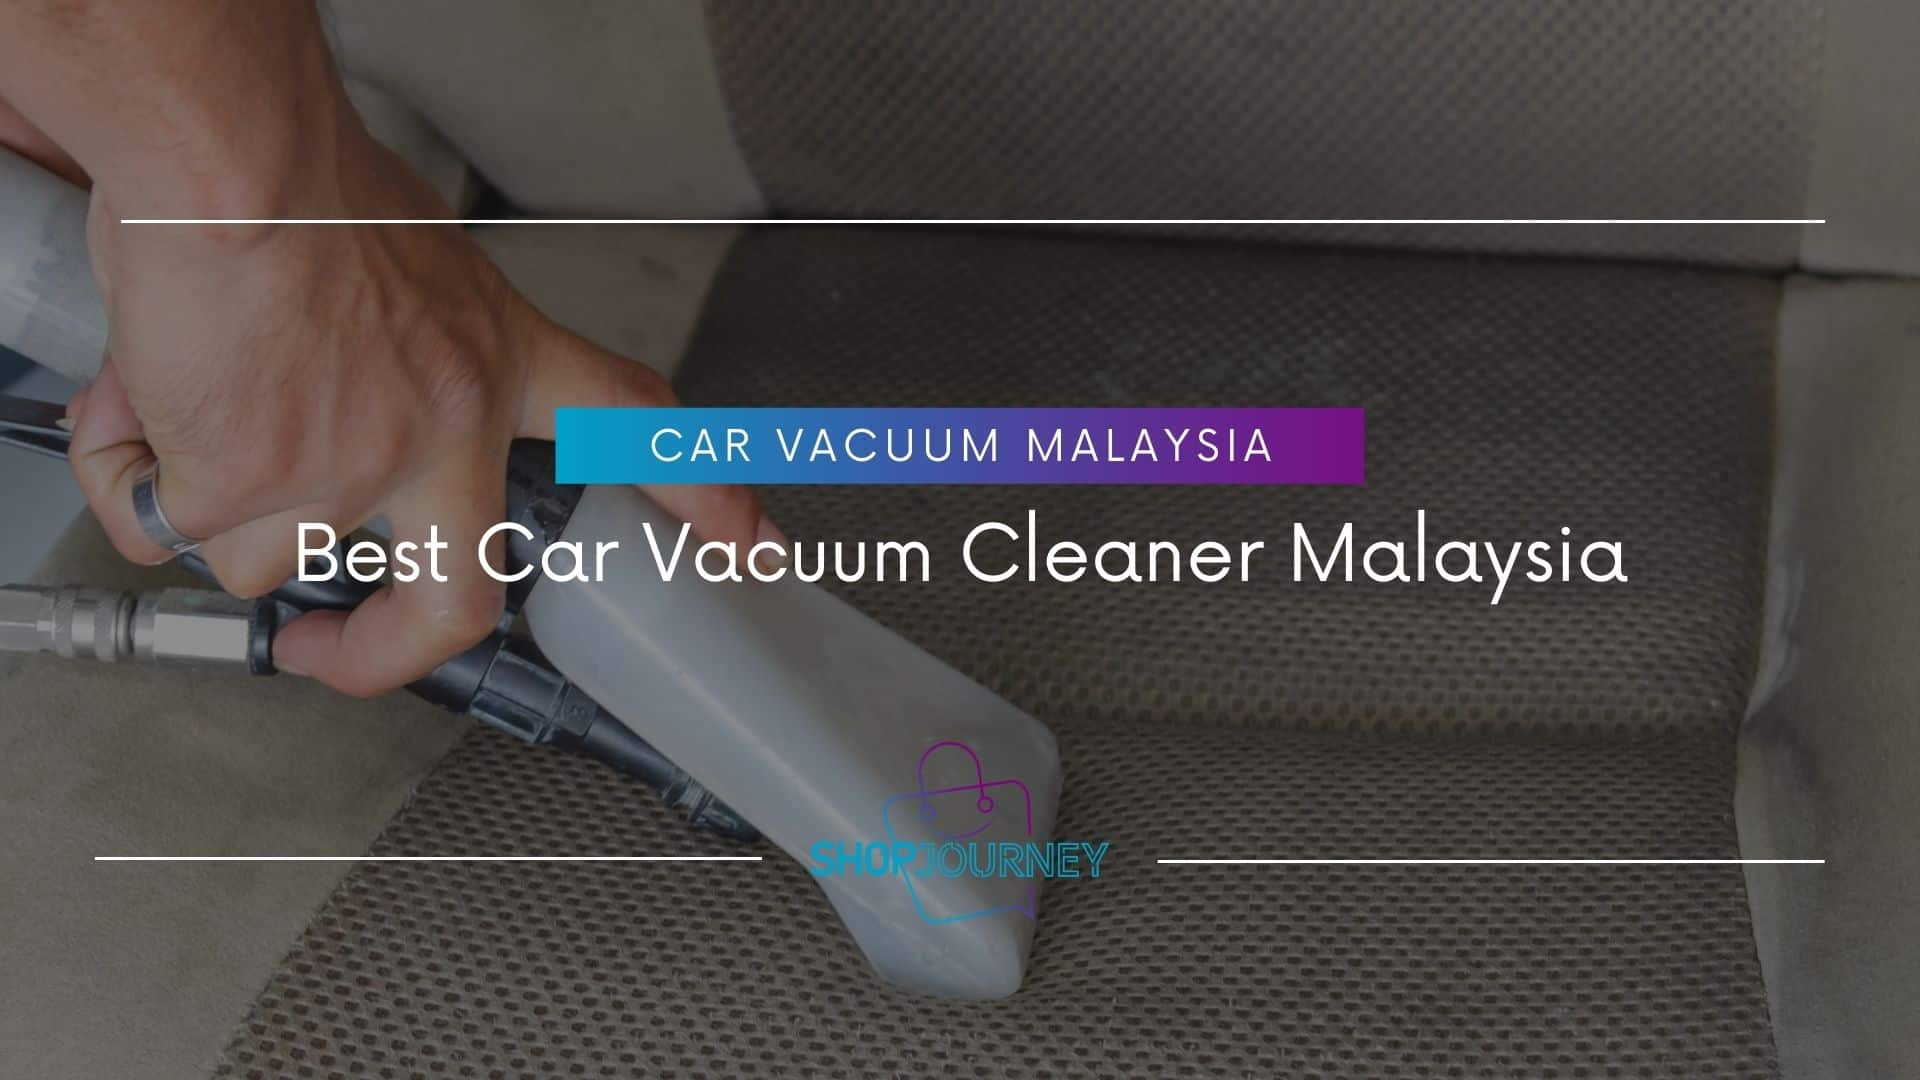 Best Car Vacuum Cleaner Malaysia Models to Buy in 2021 - Shop Journey